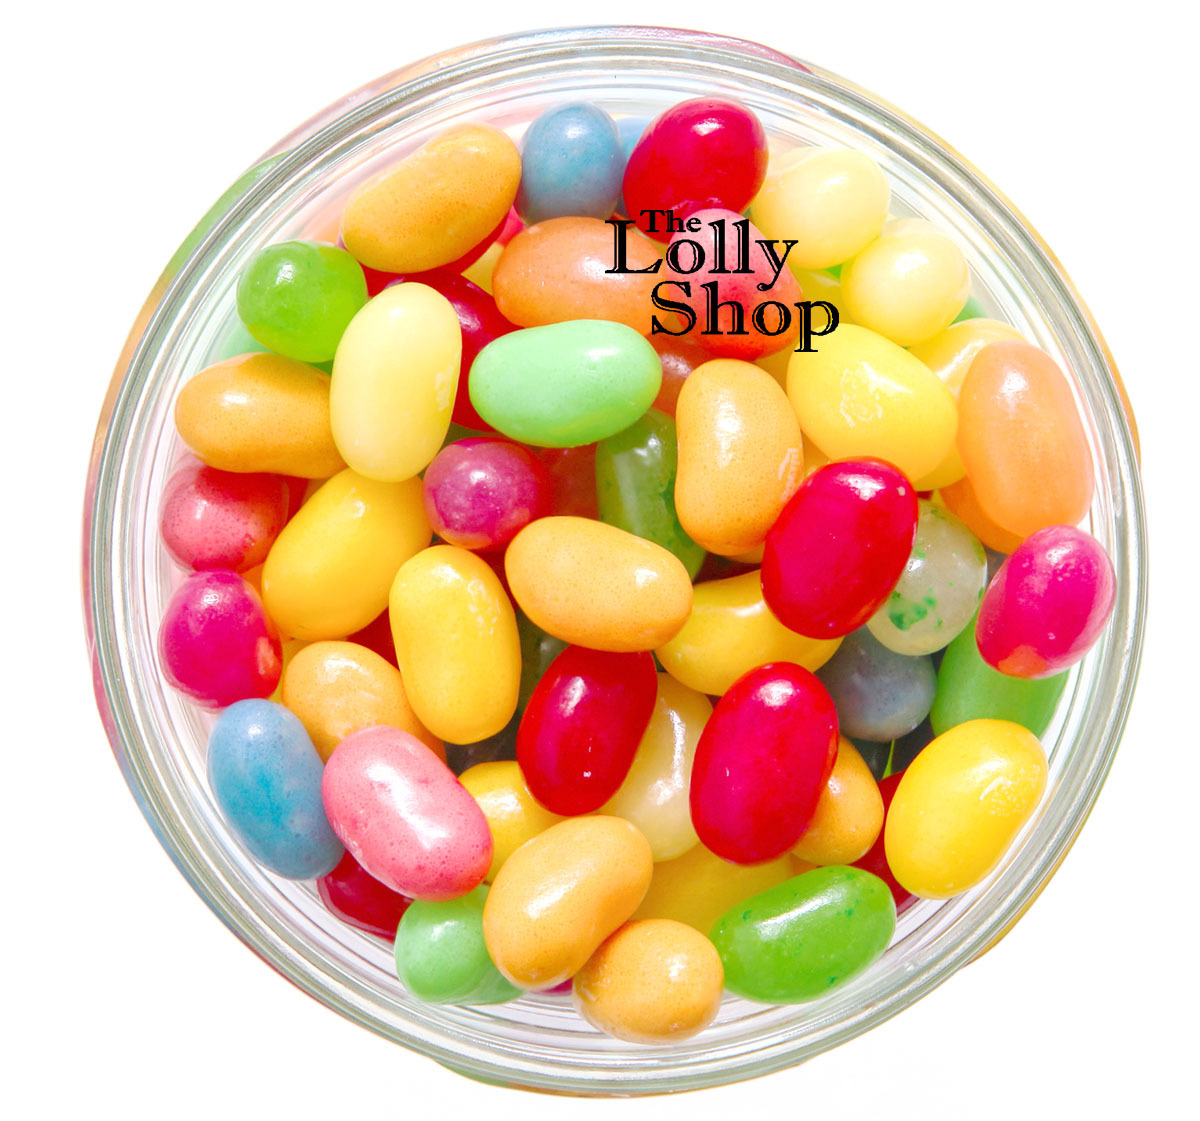 Jelly Beans Mixed 1kg Bulk Lollies Bag for Lolly Buffet - Lolliland